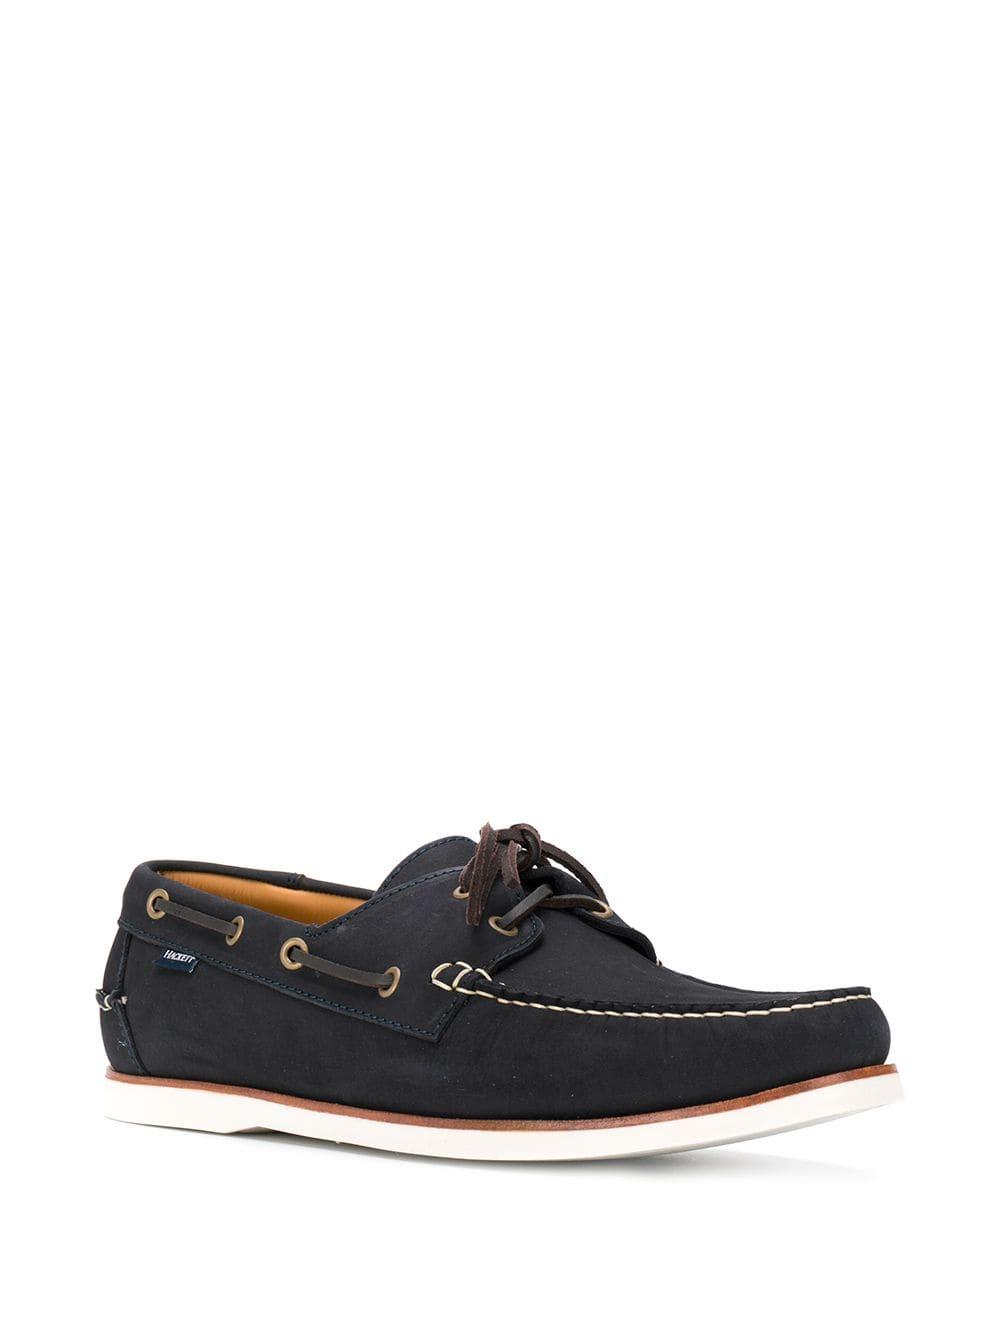 Hackett Classic Boat Shoes in Blue for Men - Lyst